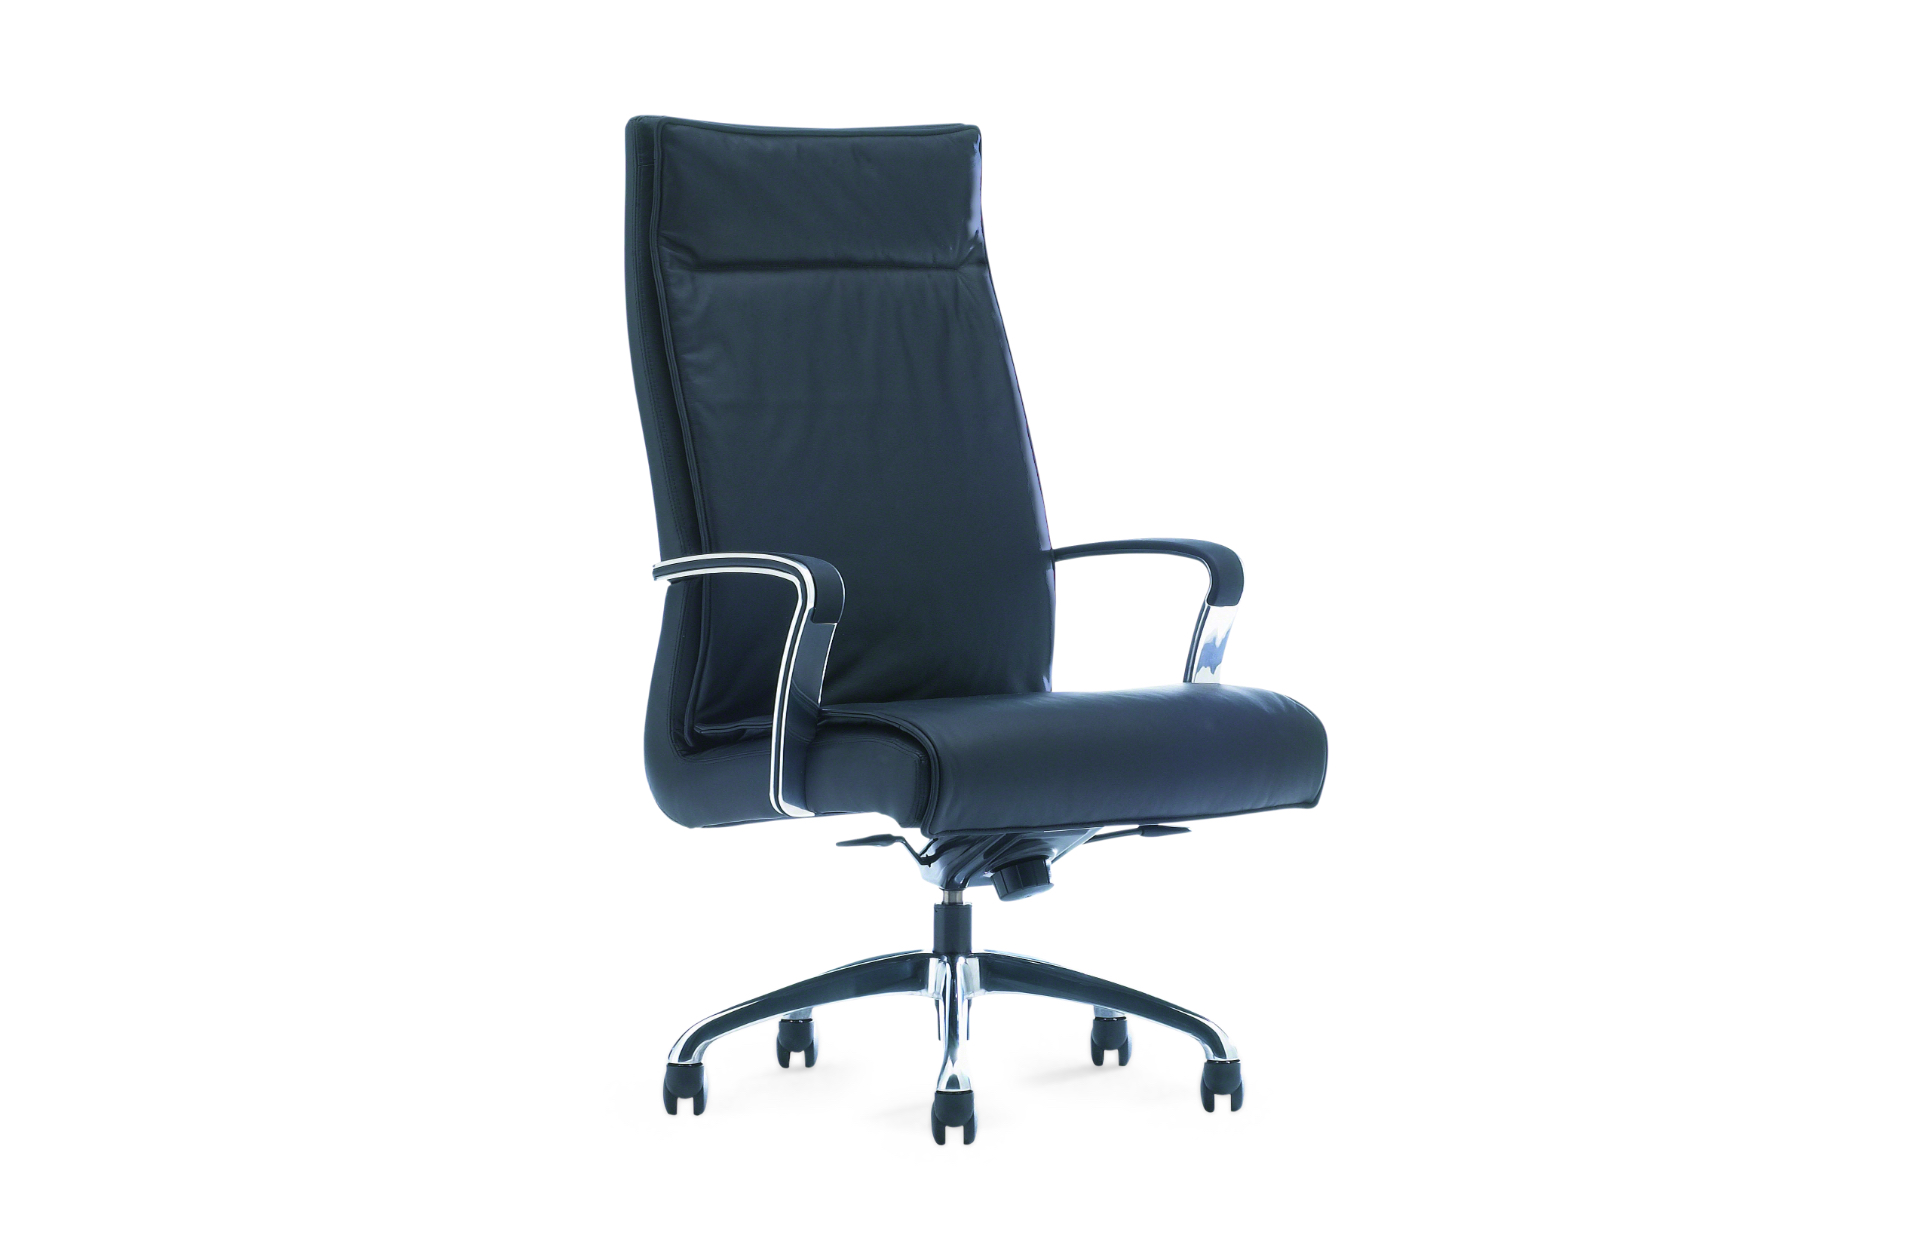 High-backed office conference chair with black leather upholstery